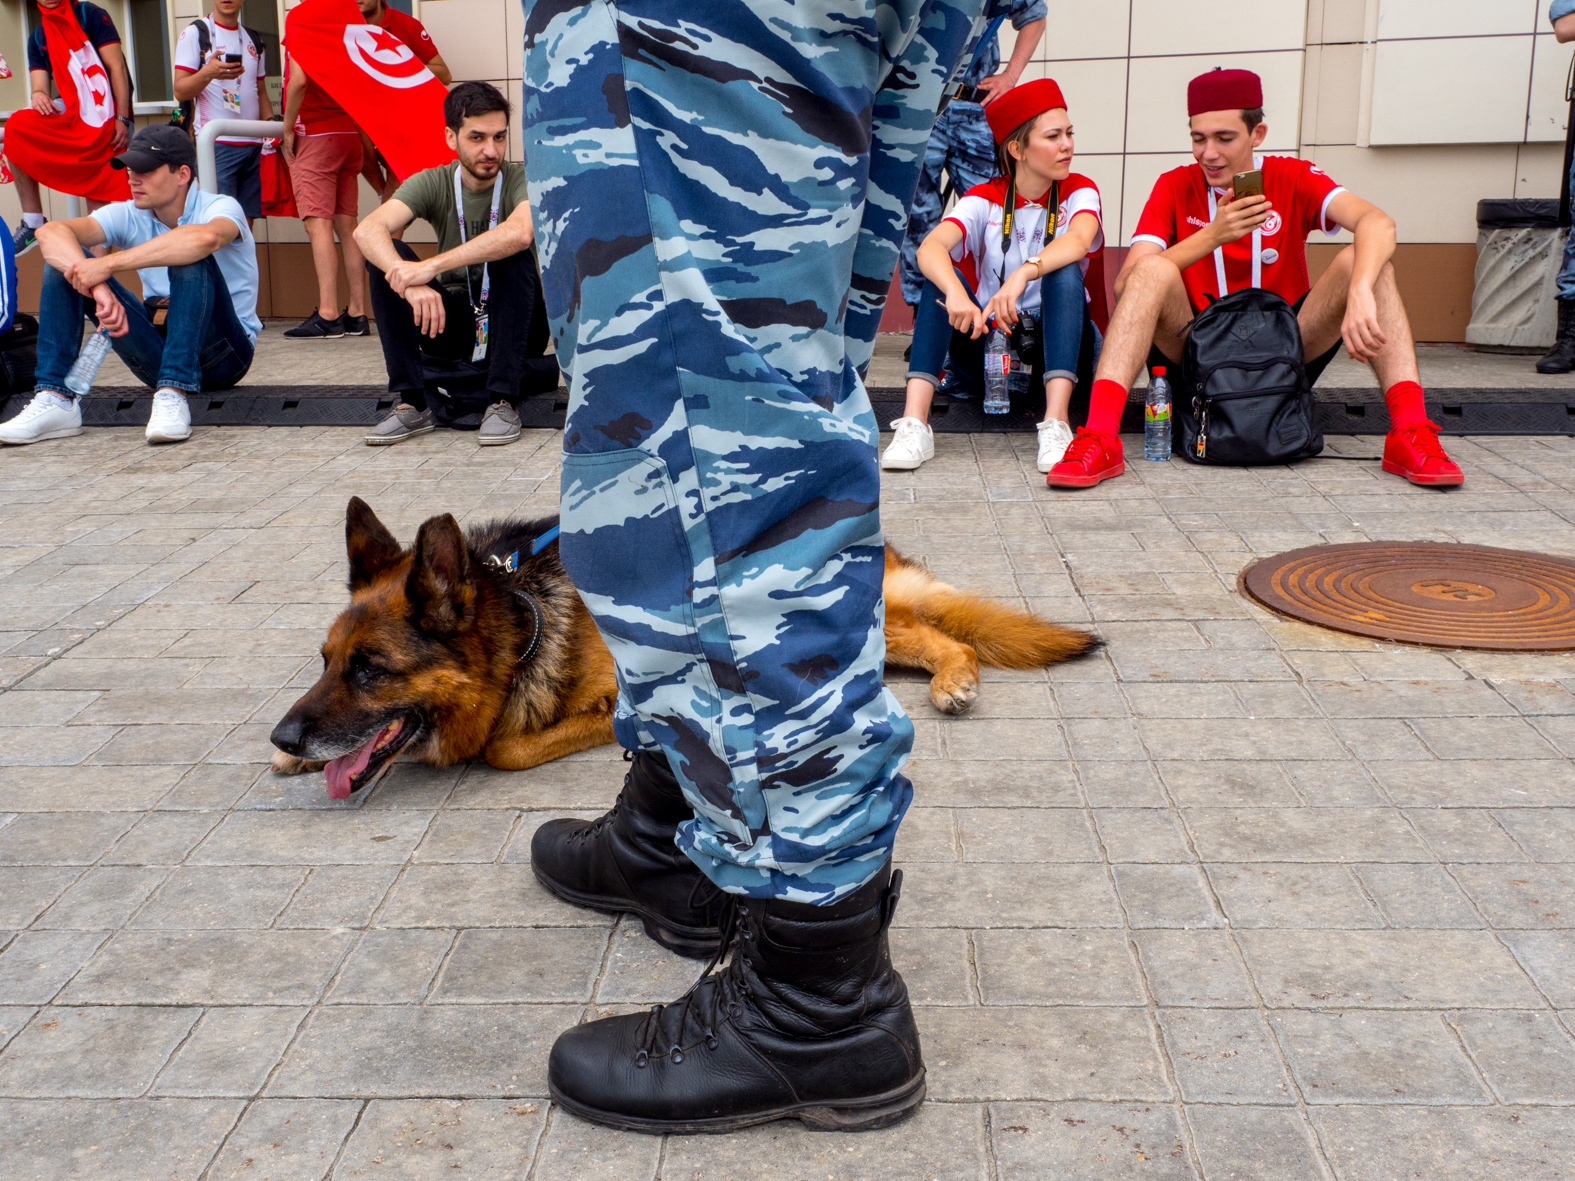 Special unit police on guard outside the Spartak Stadium in Moscow ahead of a group match between Belgium and Tunisia. The 21st FIFA World Cup football tournament took place in Russia in 2018. It was the first World Cup to be held in Eastern Europe and the eleventh time that it has been held in Europe. For the first time the tournament took place on two continents – Europe and Asia. All but two of the stadium venues were in European Russia.